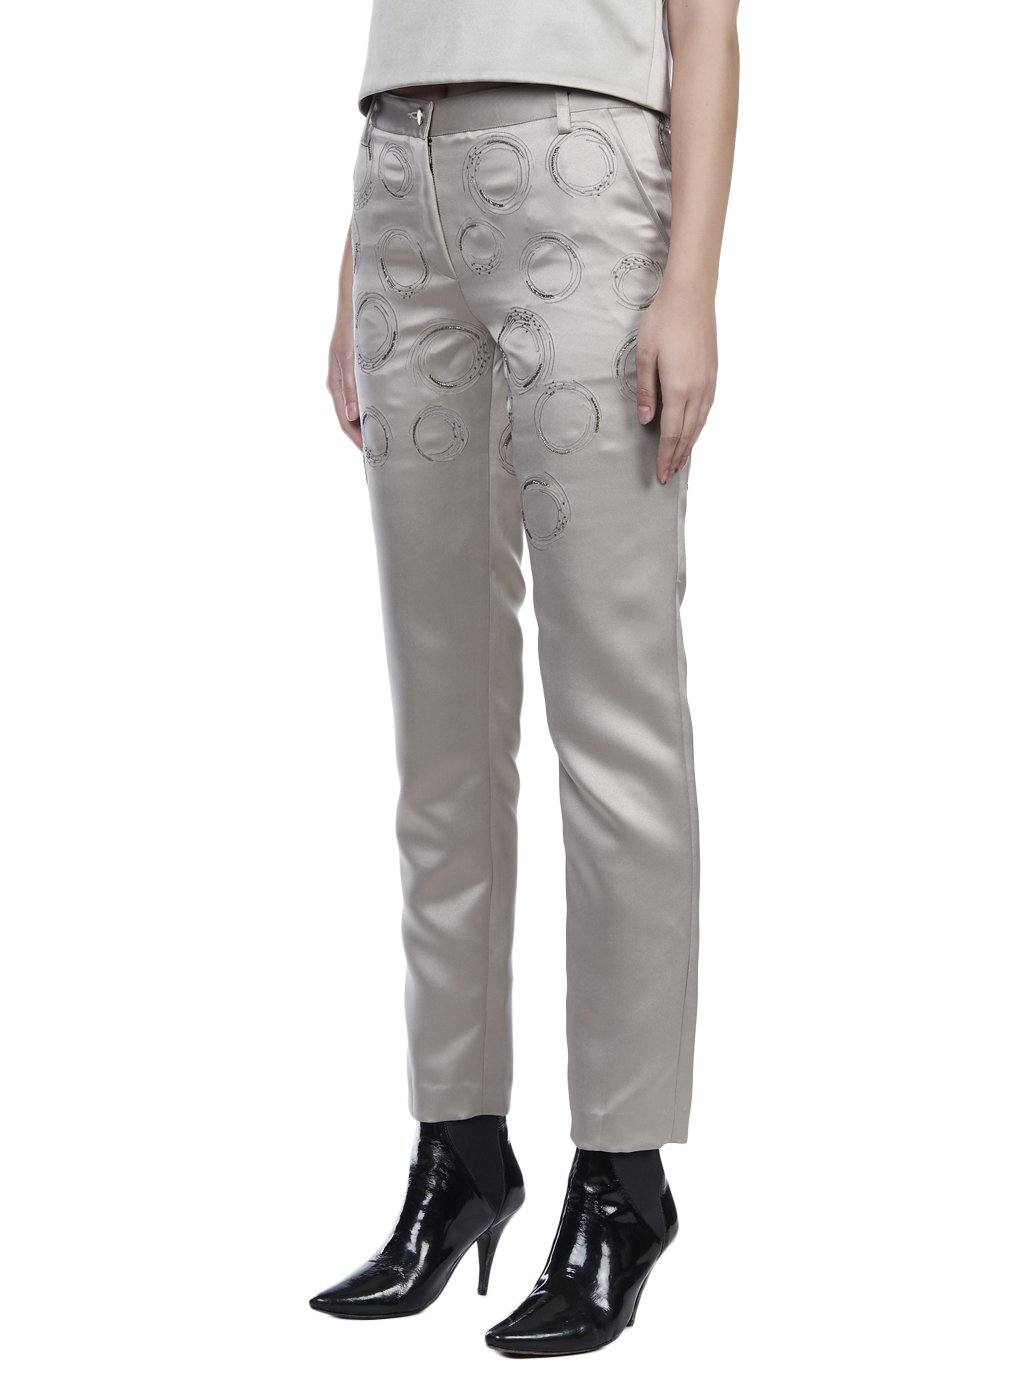 MELODRAMA TROUSERS - Genes online store 2020